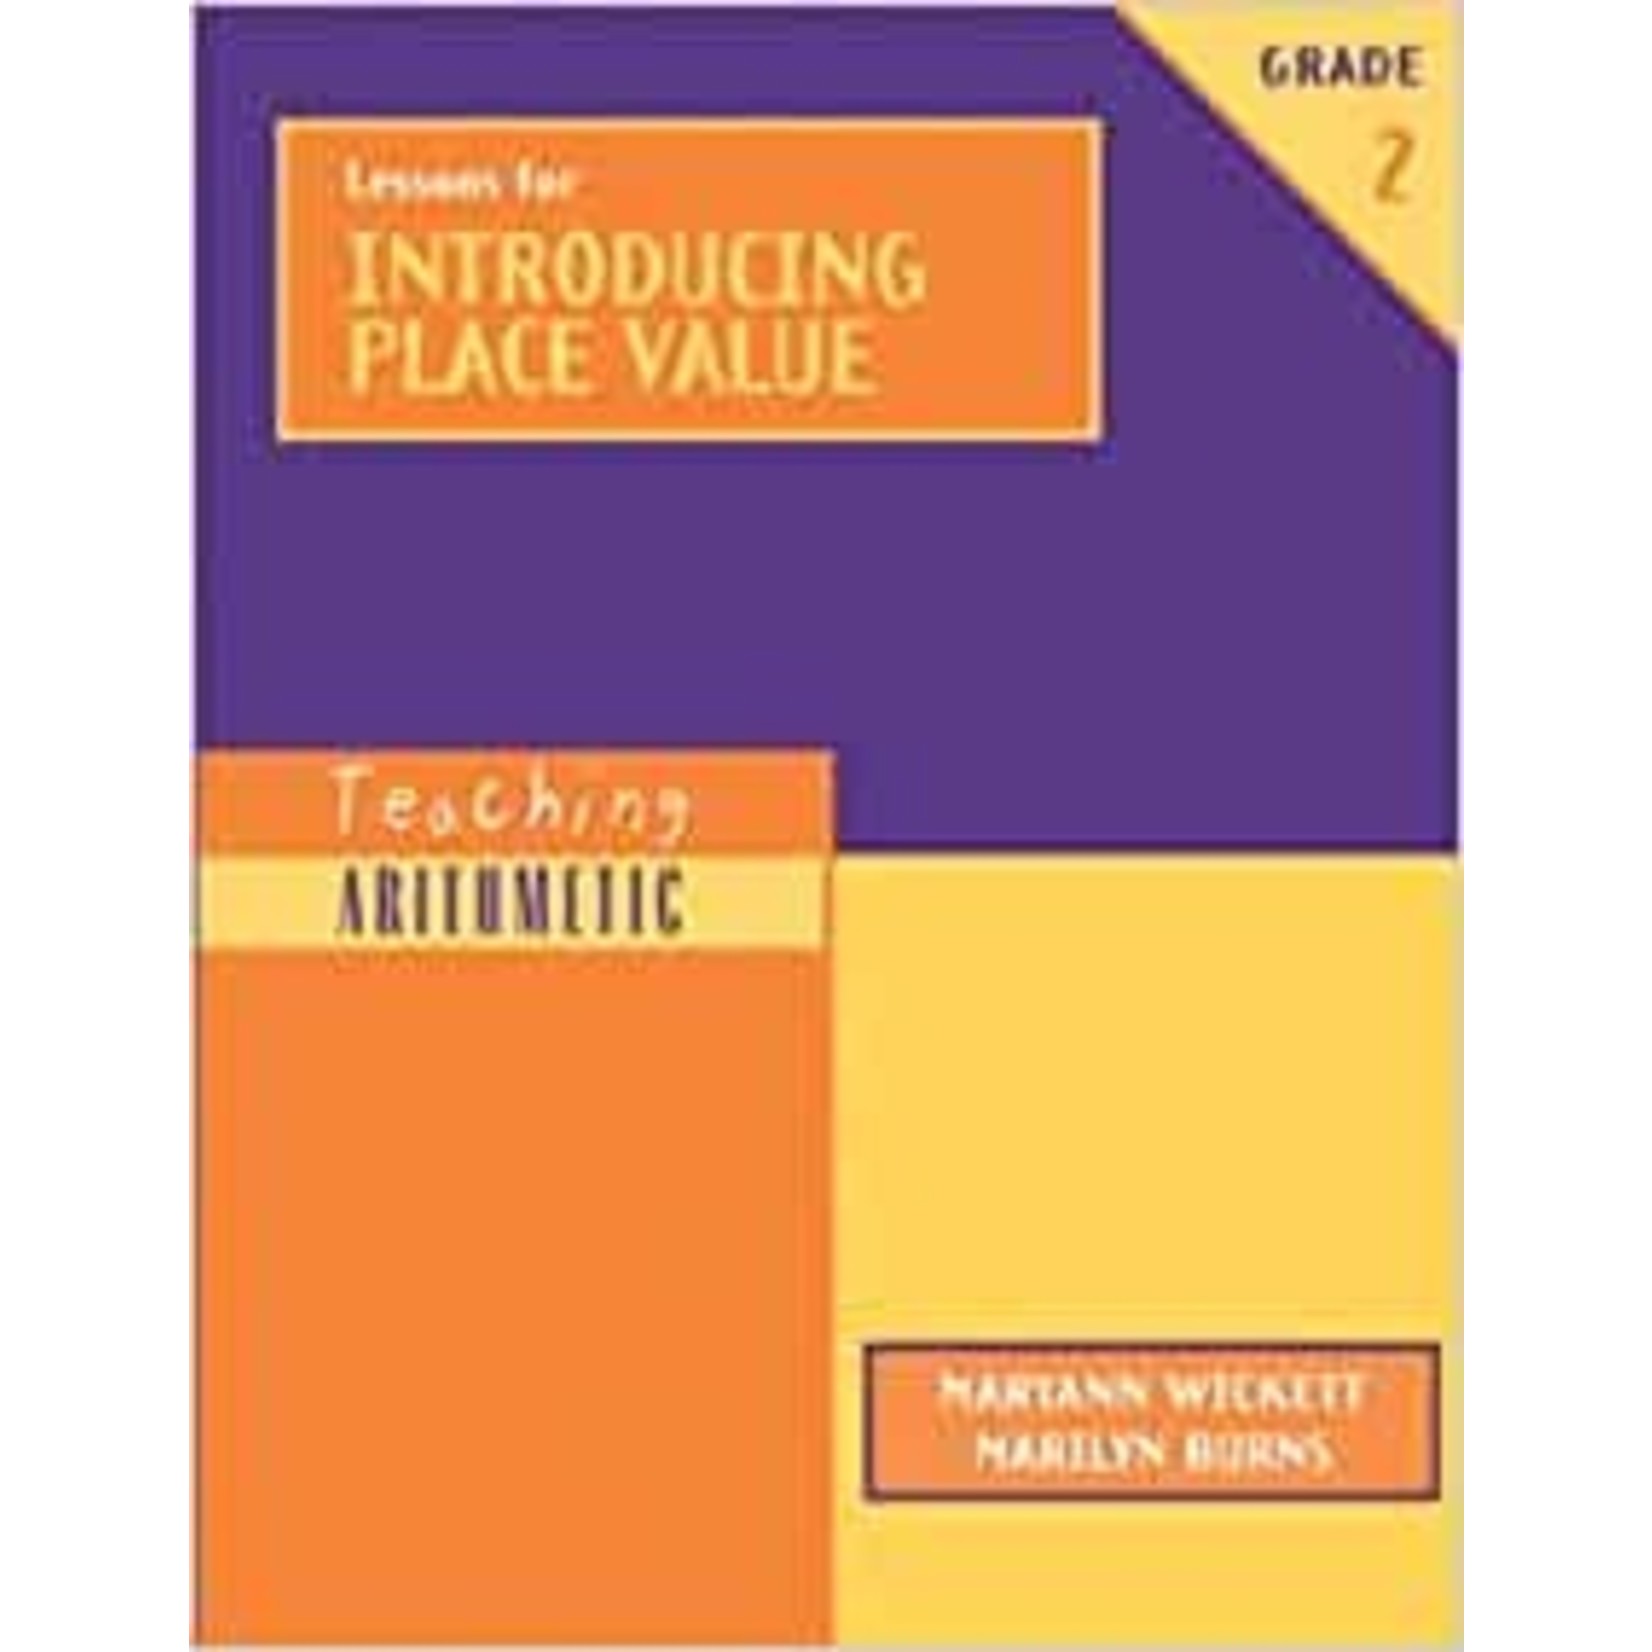 Lessons for Introducing Place Value, Grade 2 (Teaching Arithmetic)